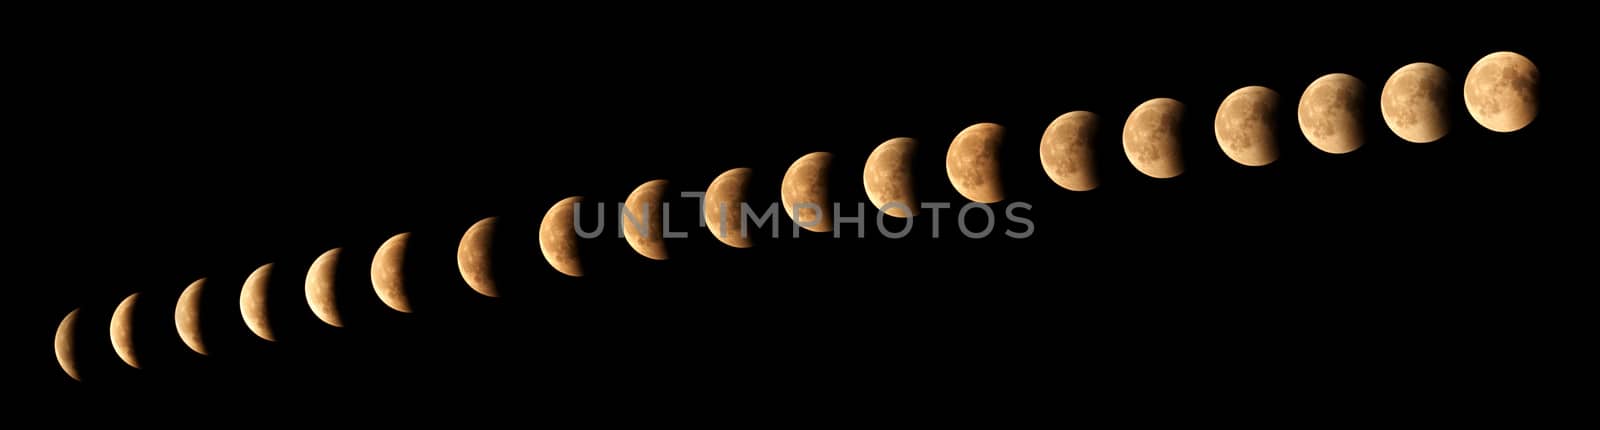 Moon Eclipse by Chemik11